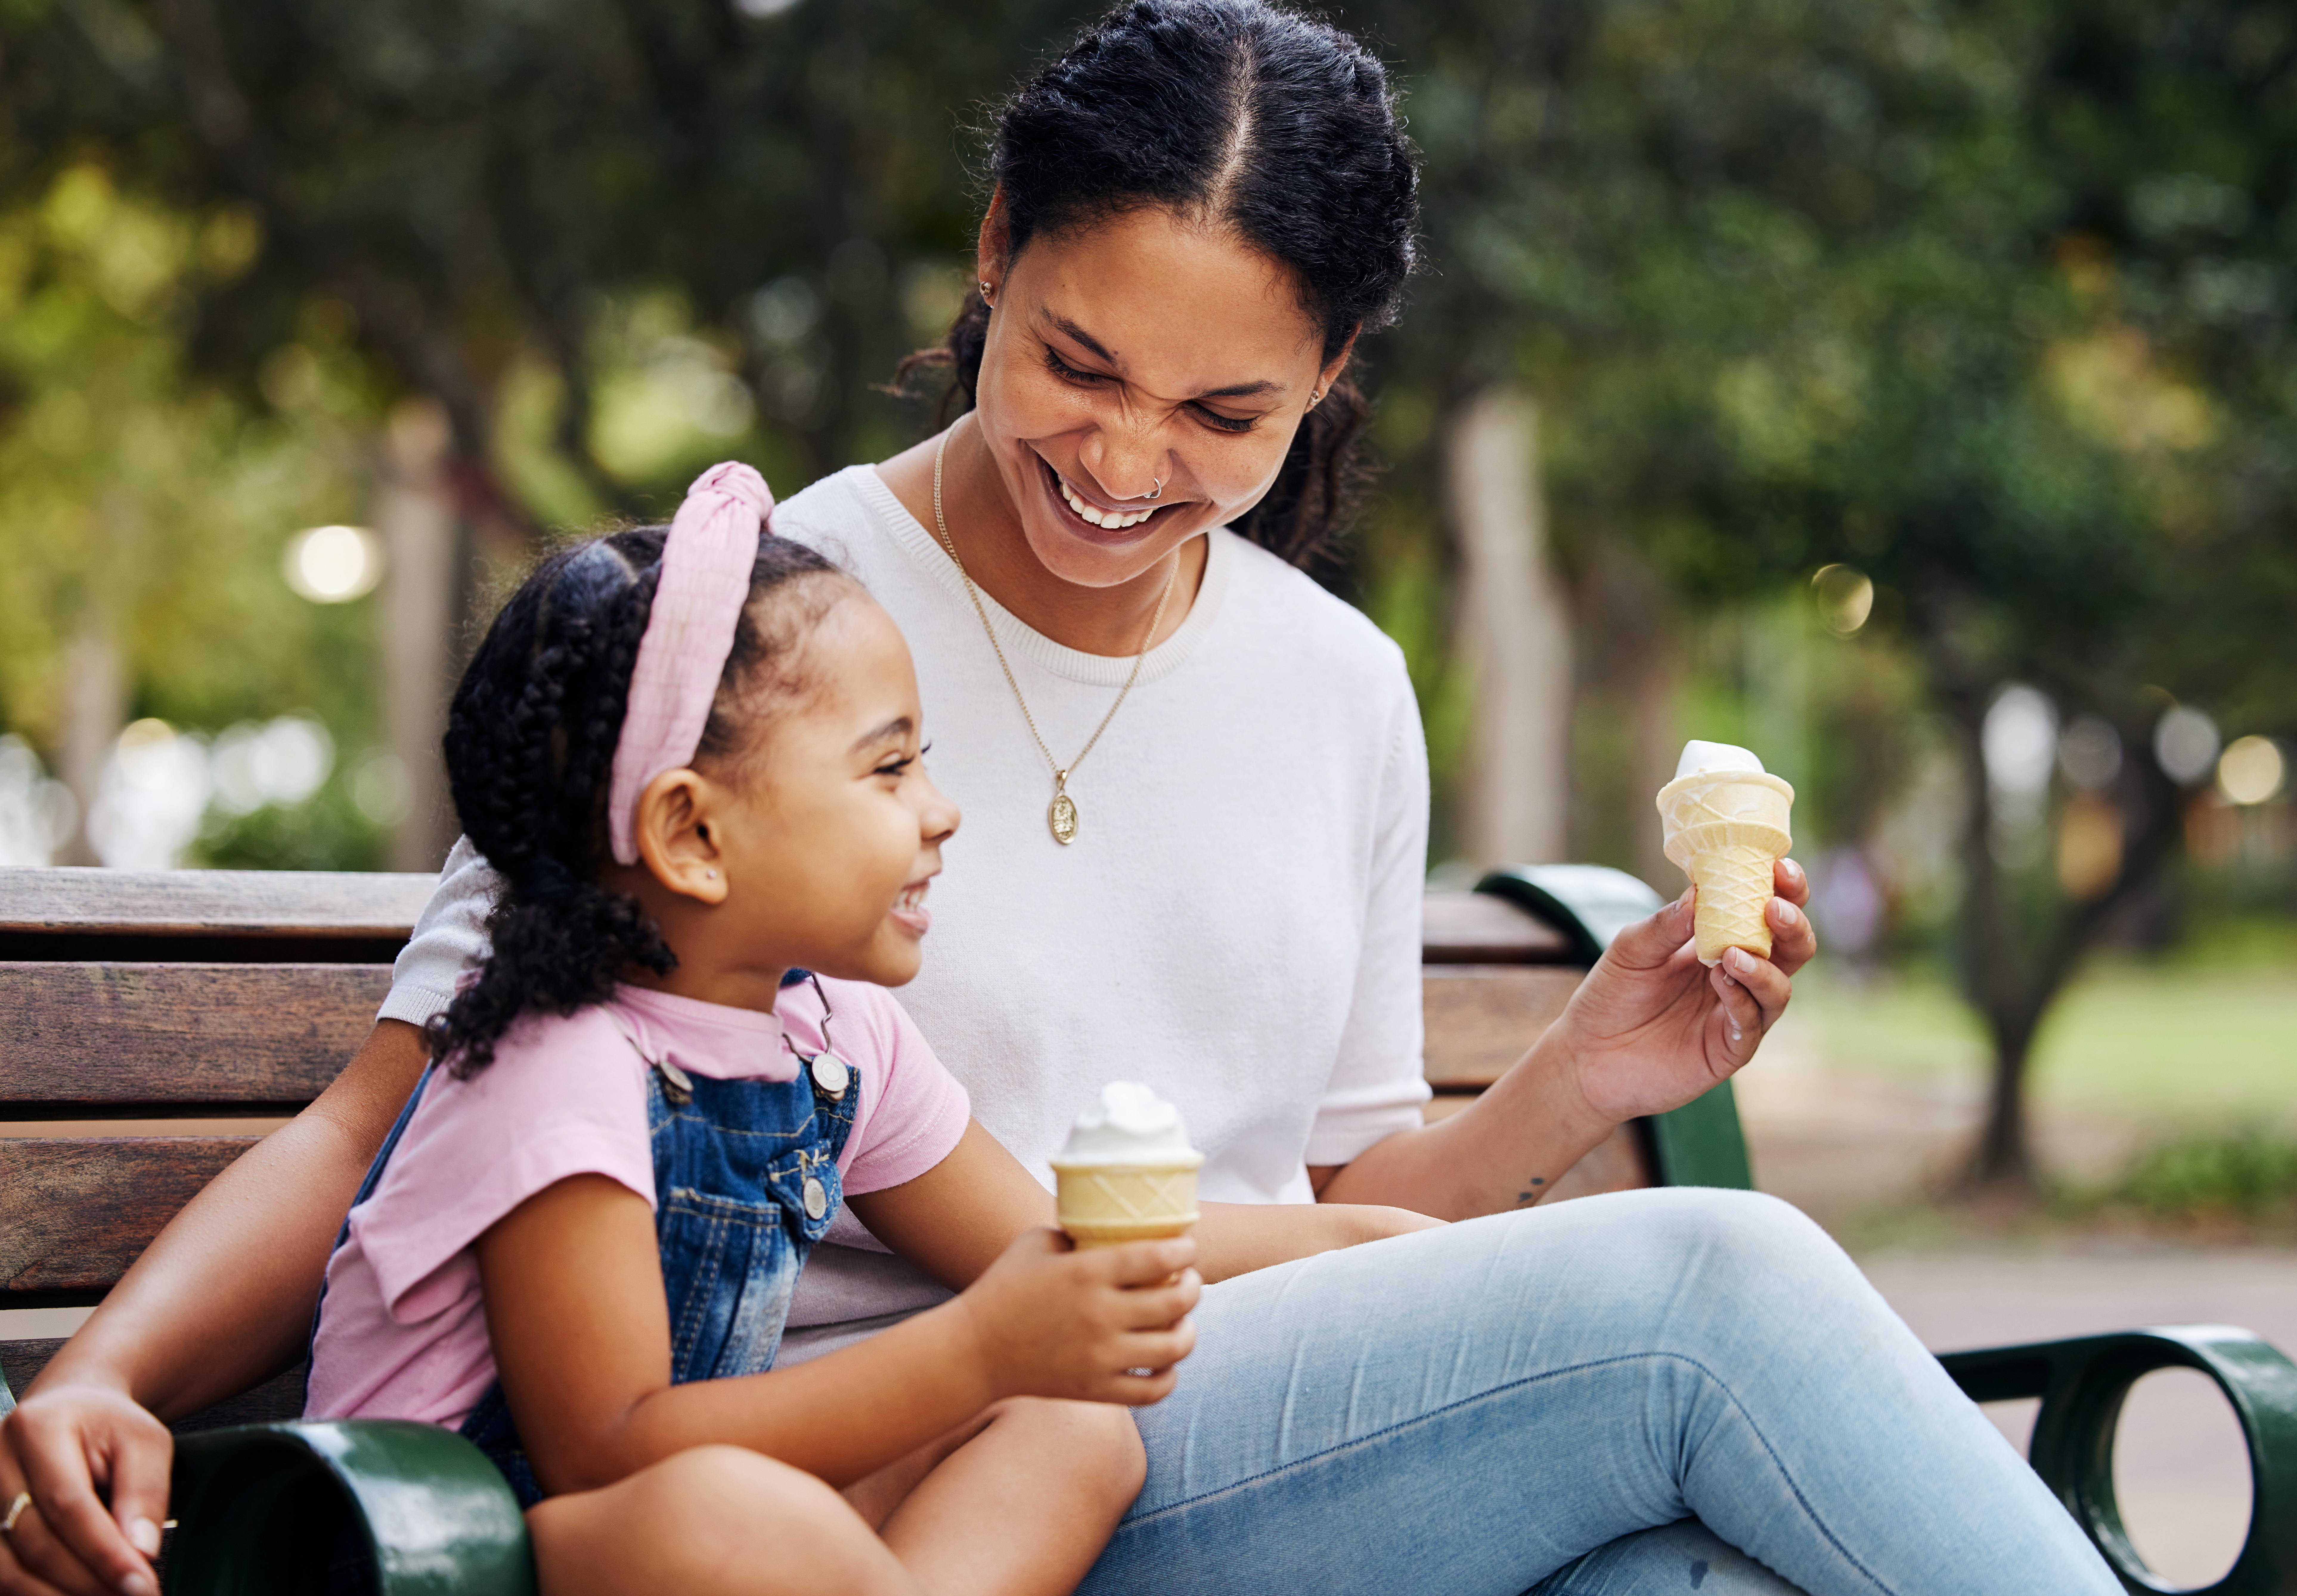 A mother and daughter having ice cream on a park bench | Source: Getty Images